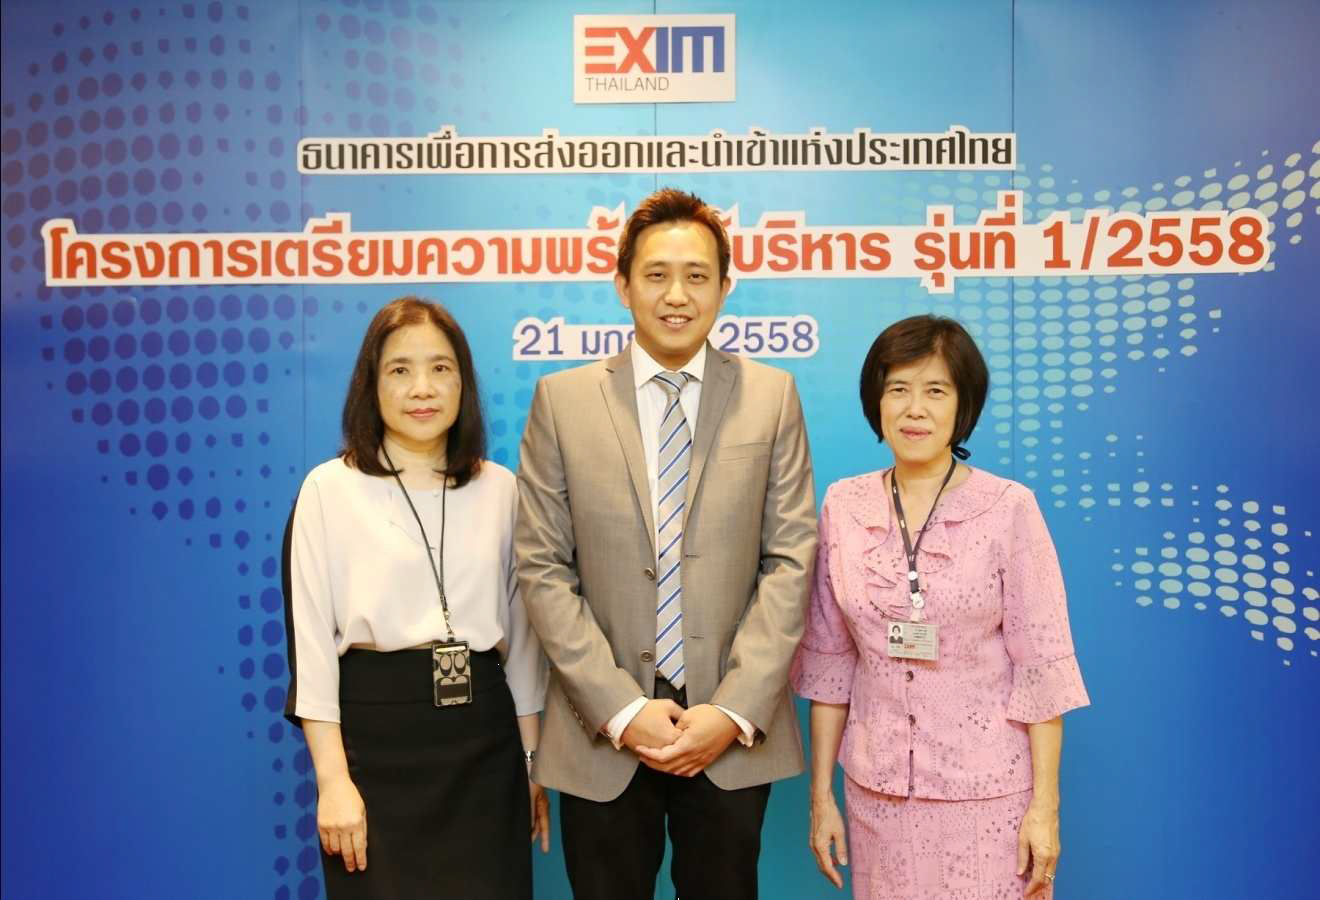 EXIM Thailand Launches First In-house Executive Program in 2015